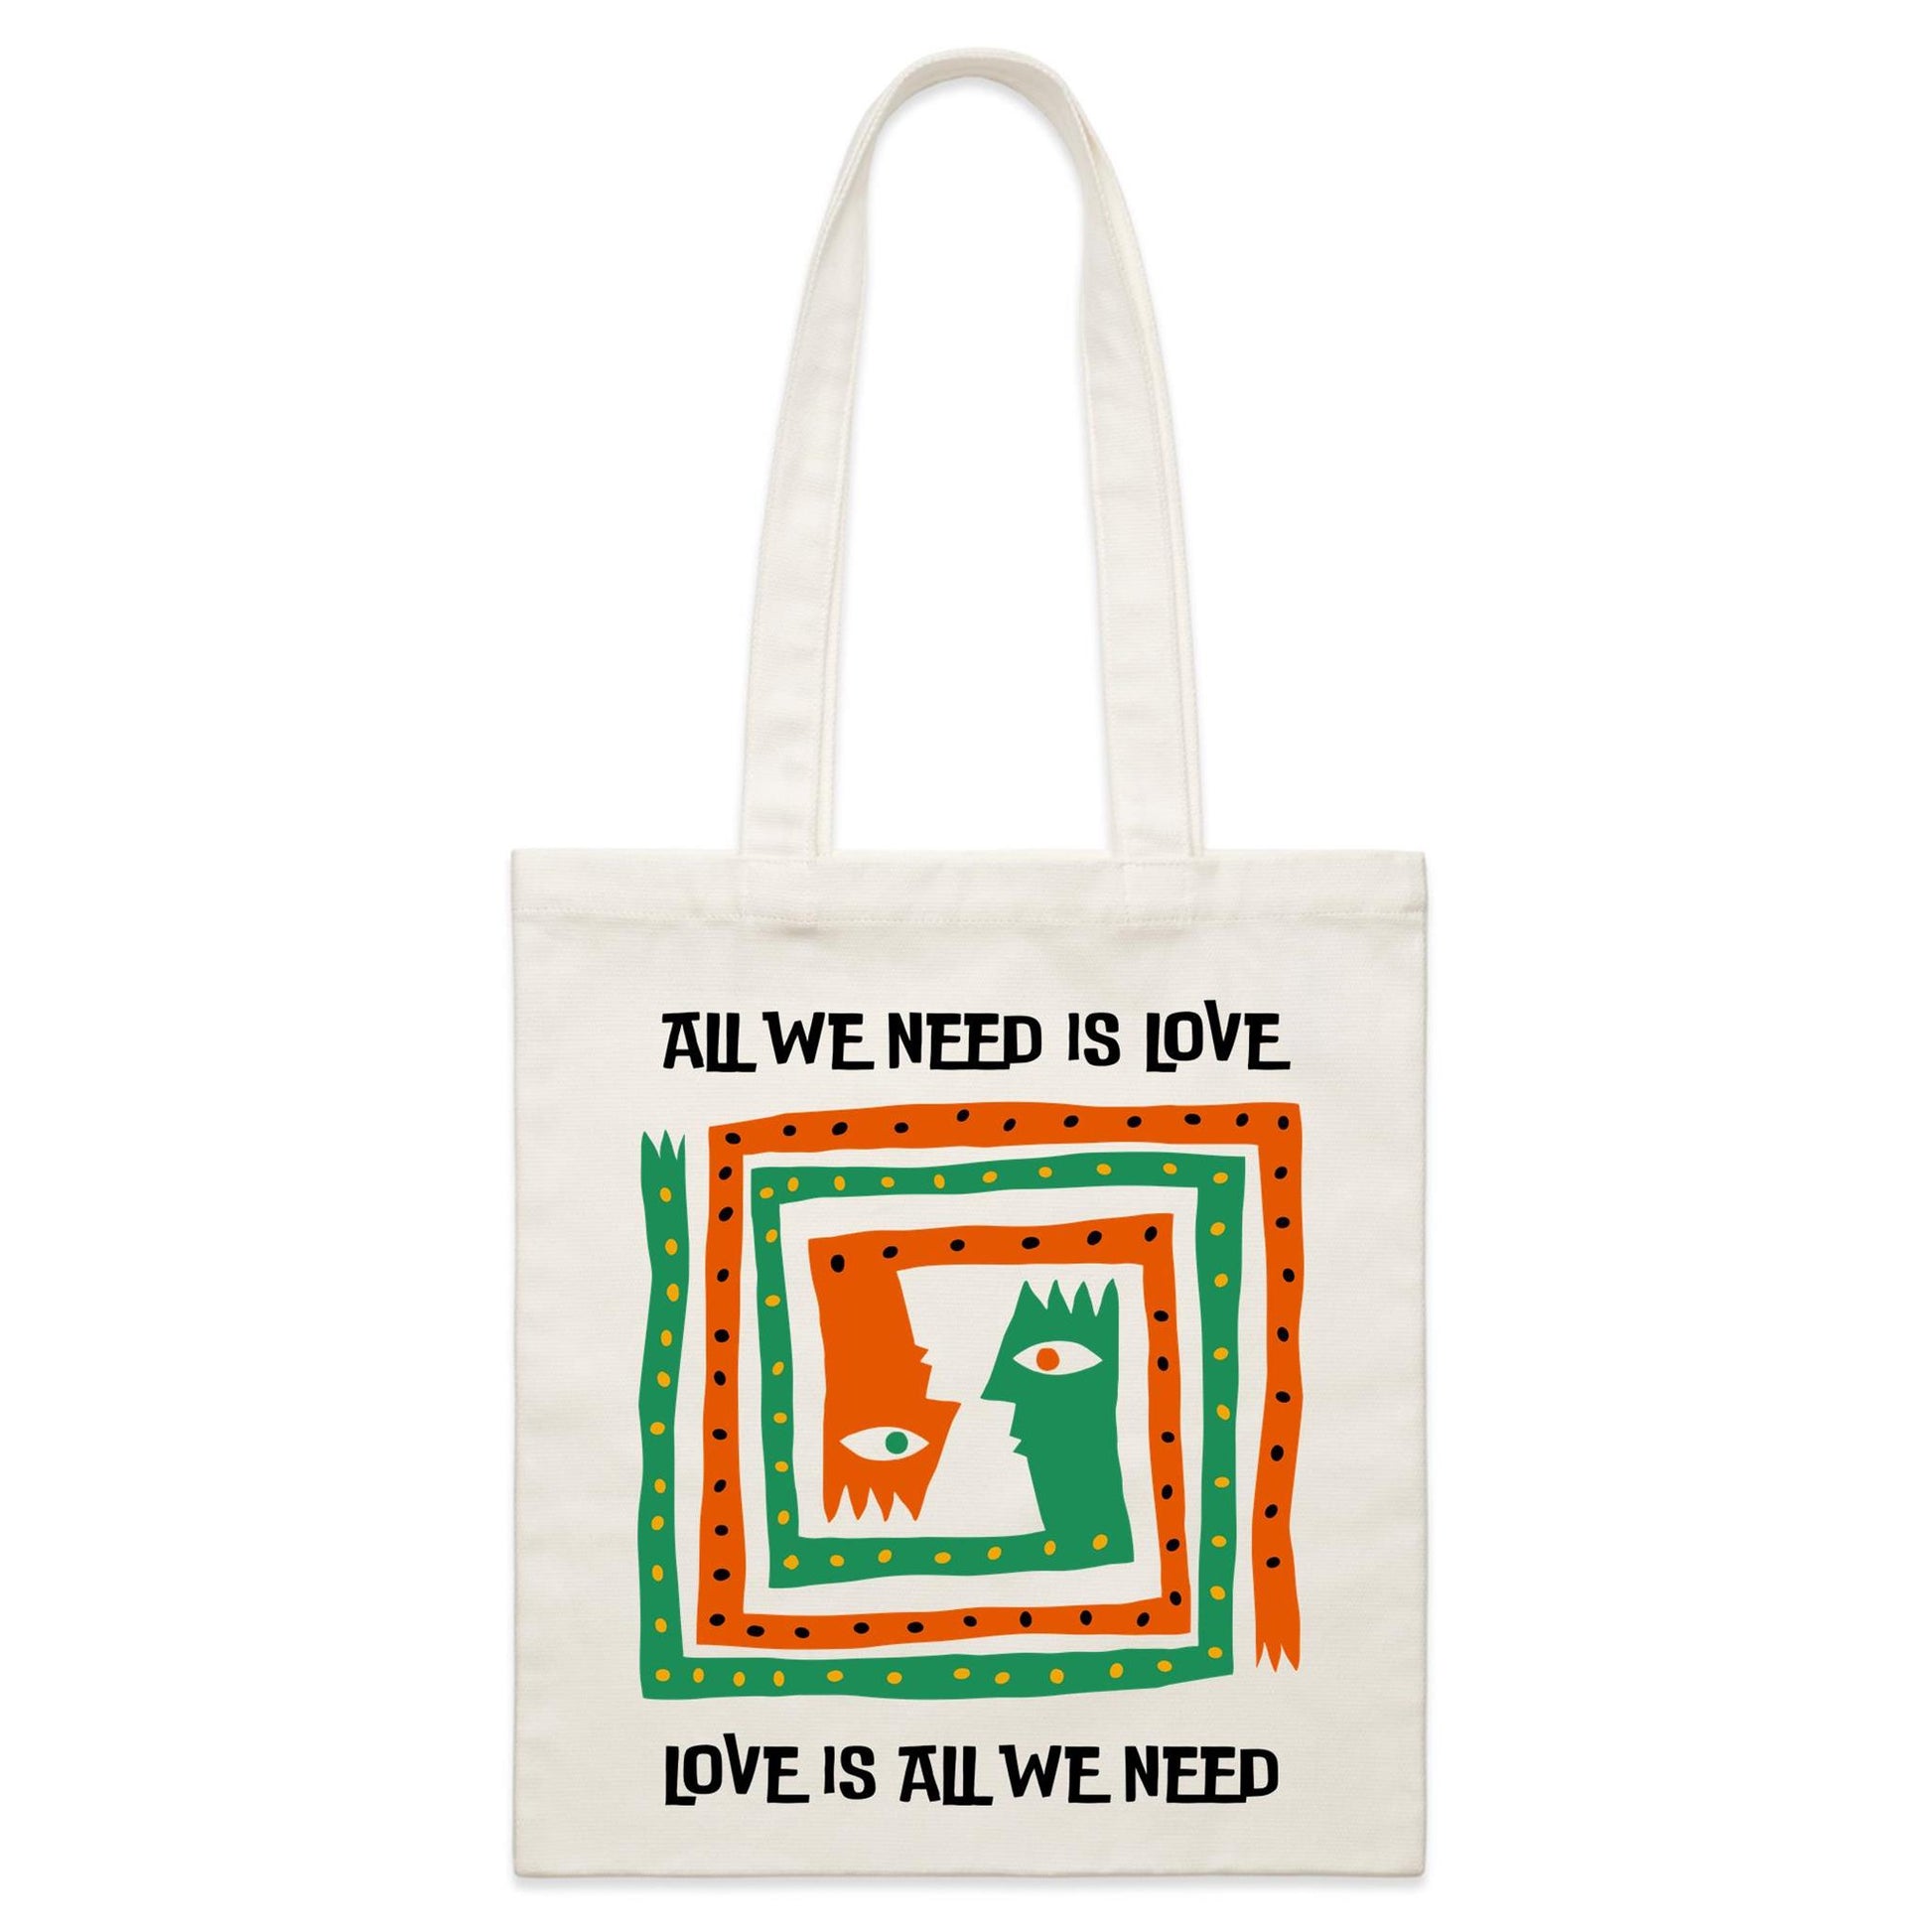 All We Need Is Love - Parcel Canvas Tote Bag Default Title Parcel Tote Bag